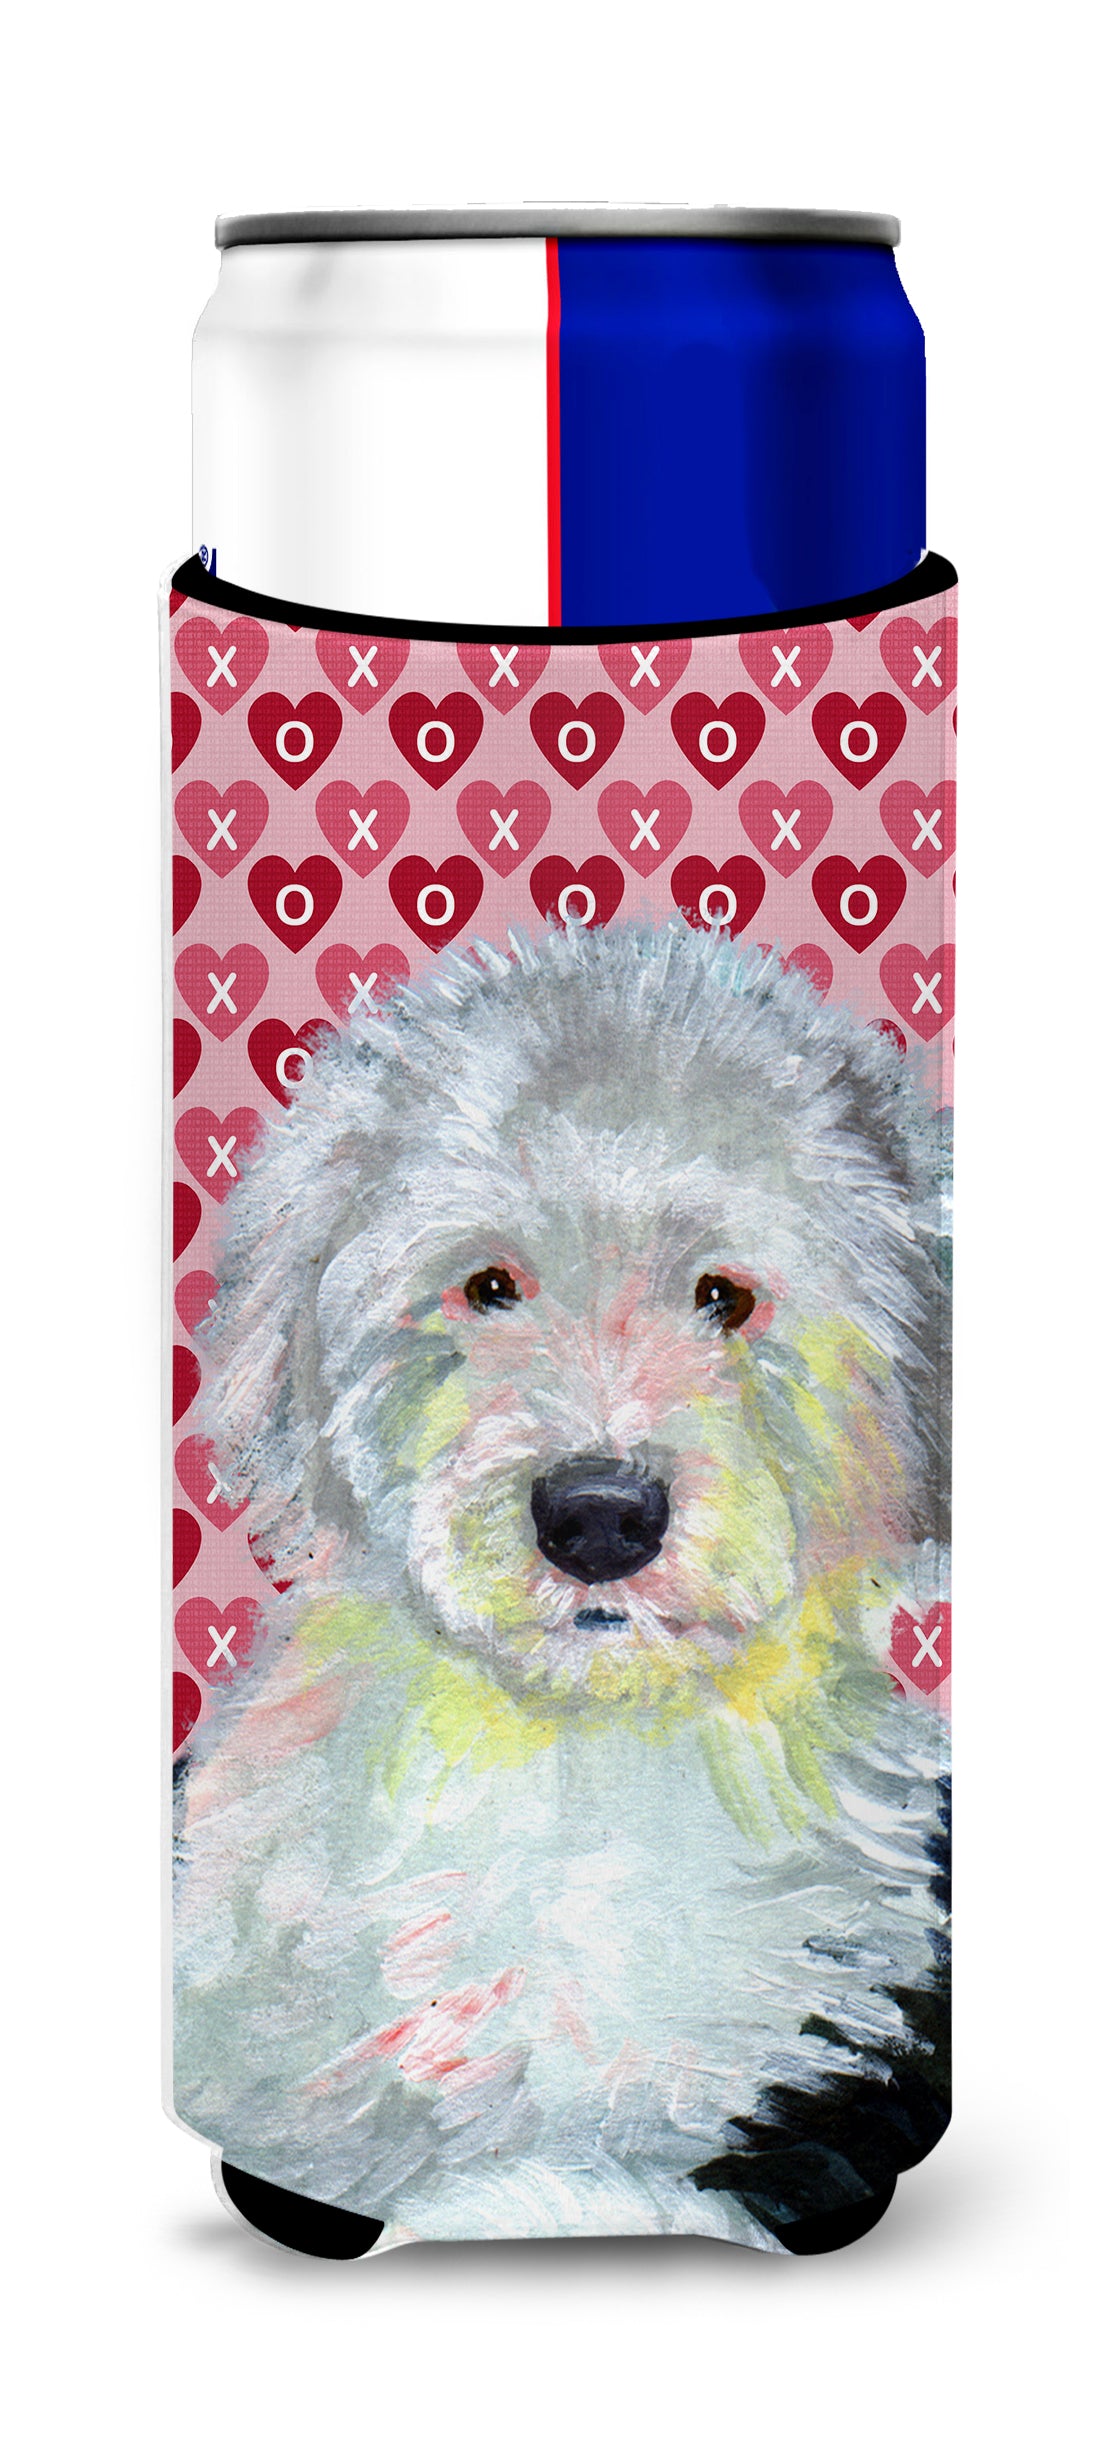 Old English Sheepdog Hearts Love and Valentine's Day Portrait Ultra Beverage Insulators for slim cans LH9171MUK.